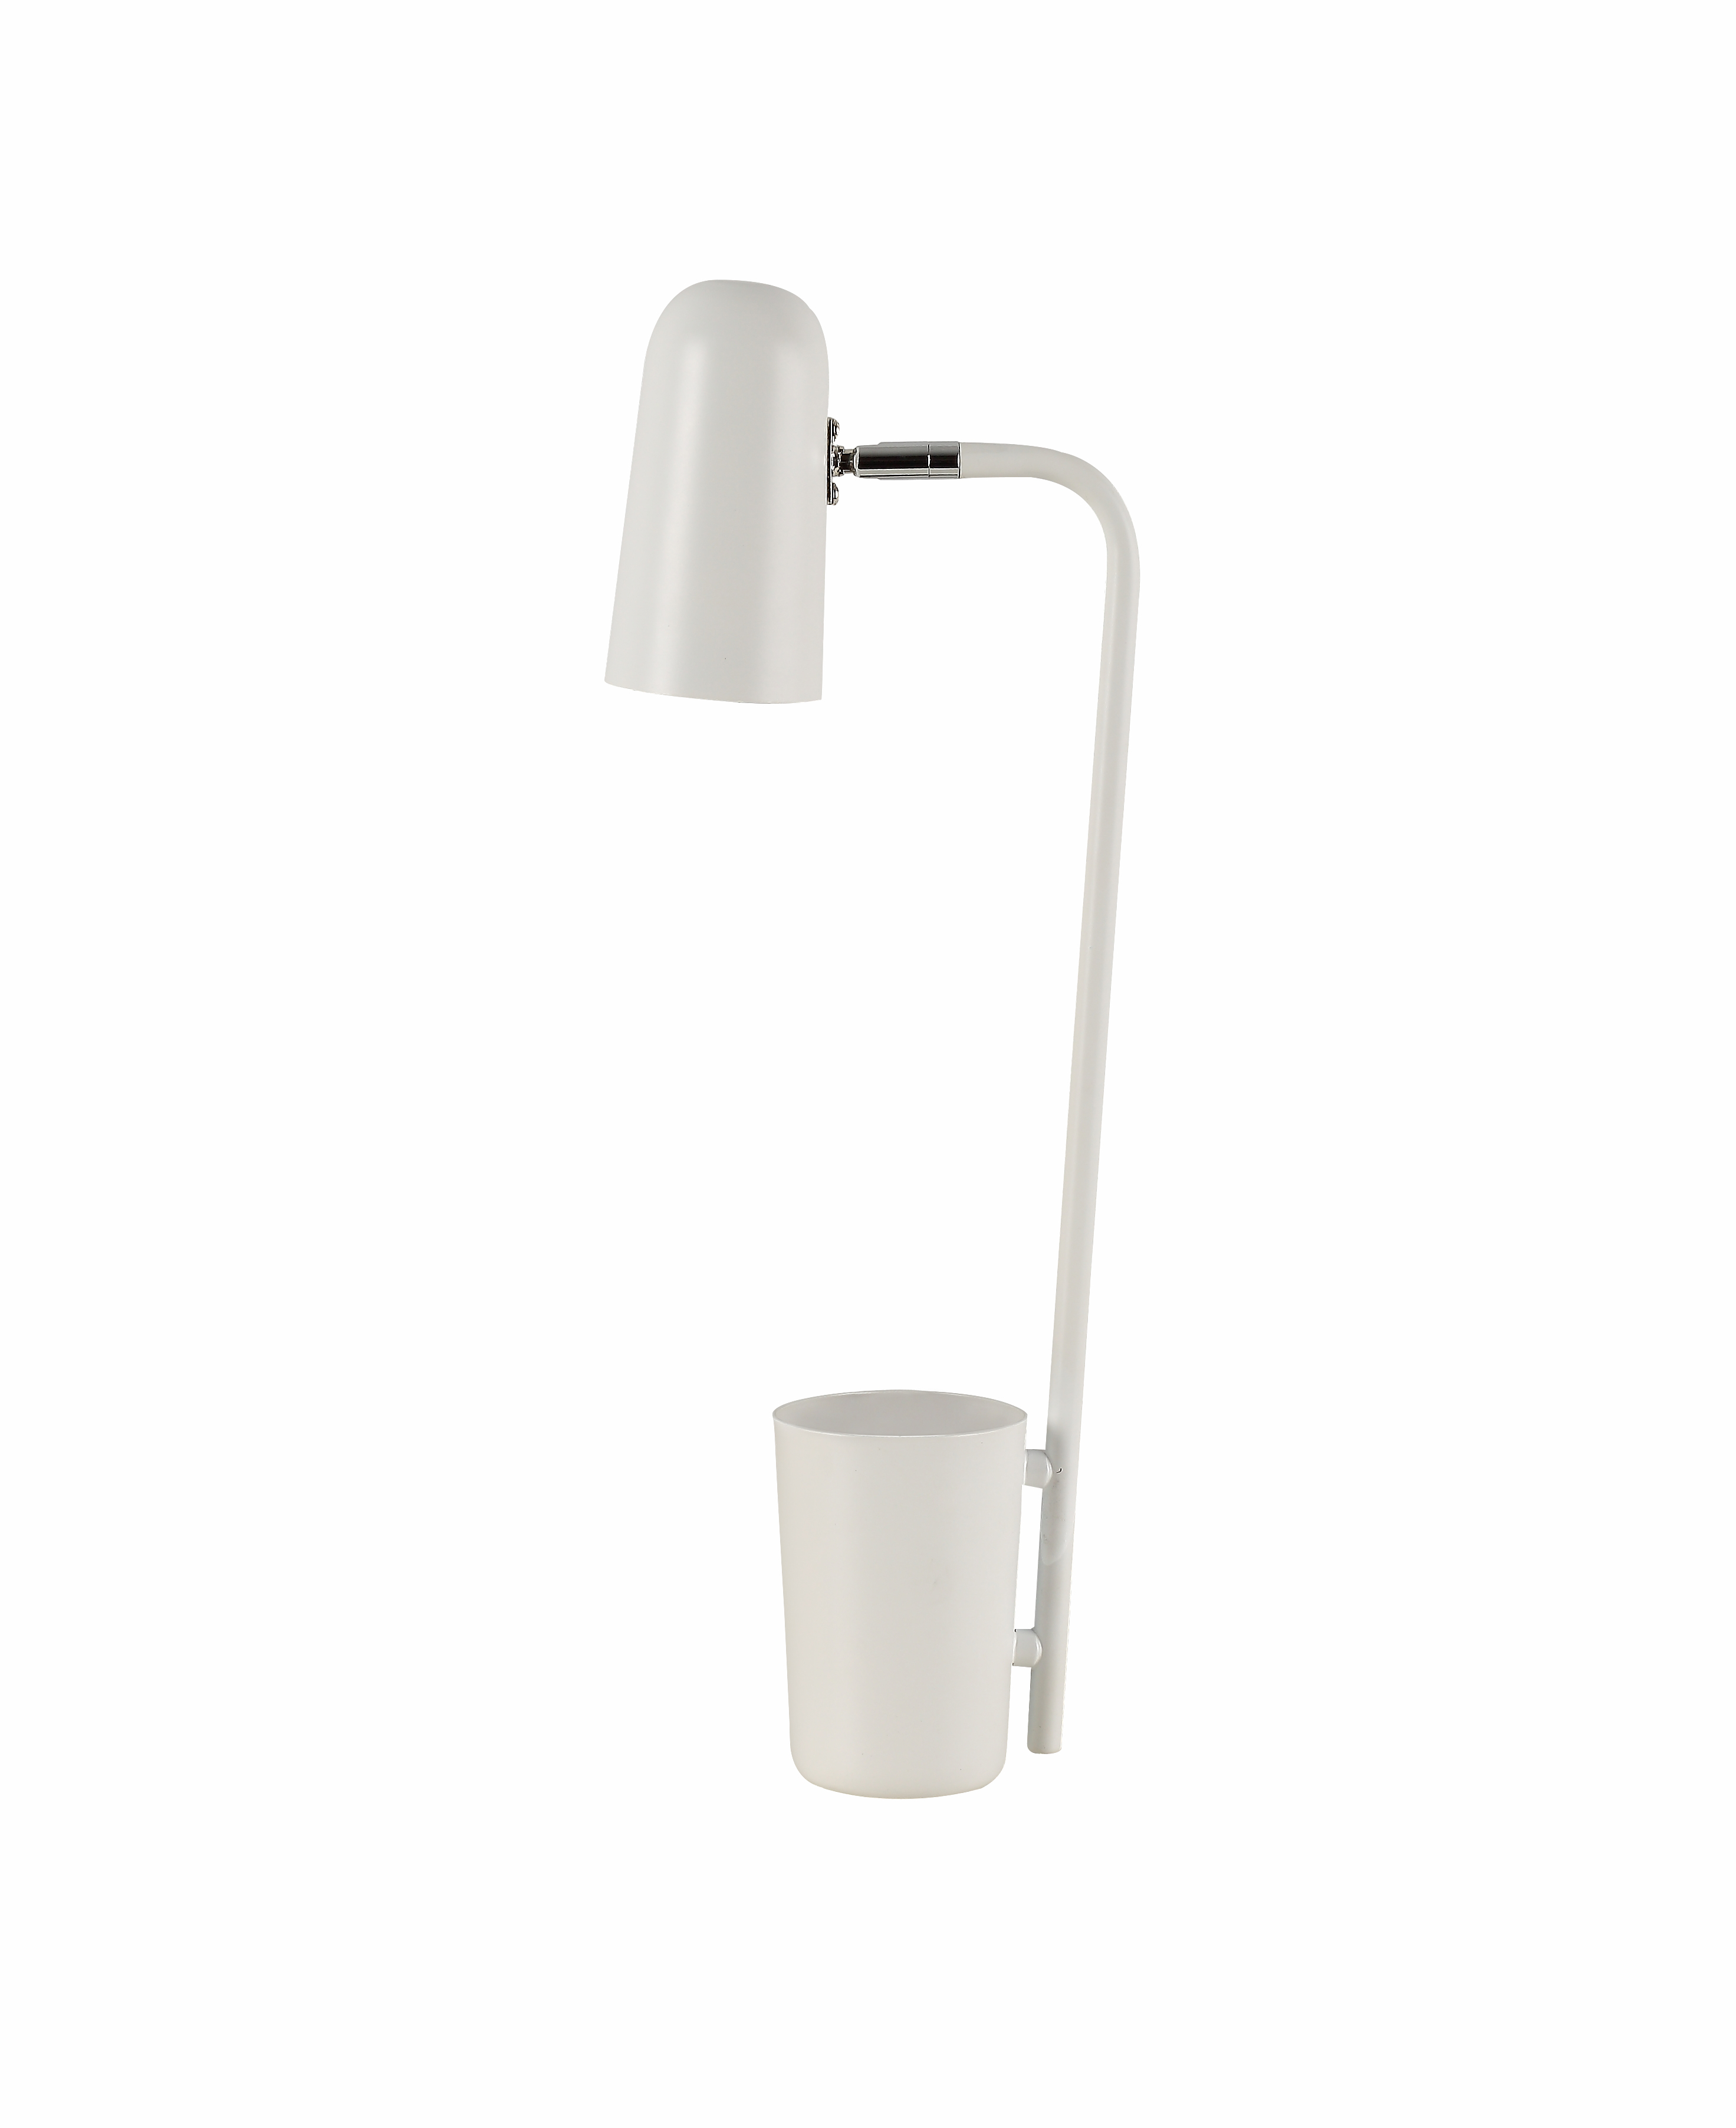 TABLE LAMP SES Matte WH W160mm x H490mm WTY 1YR